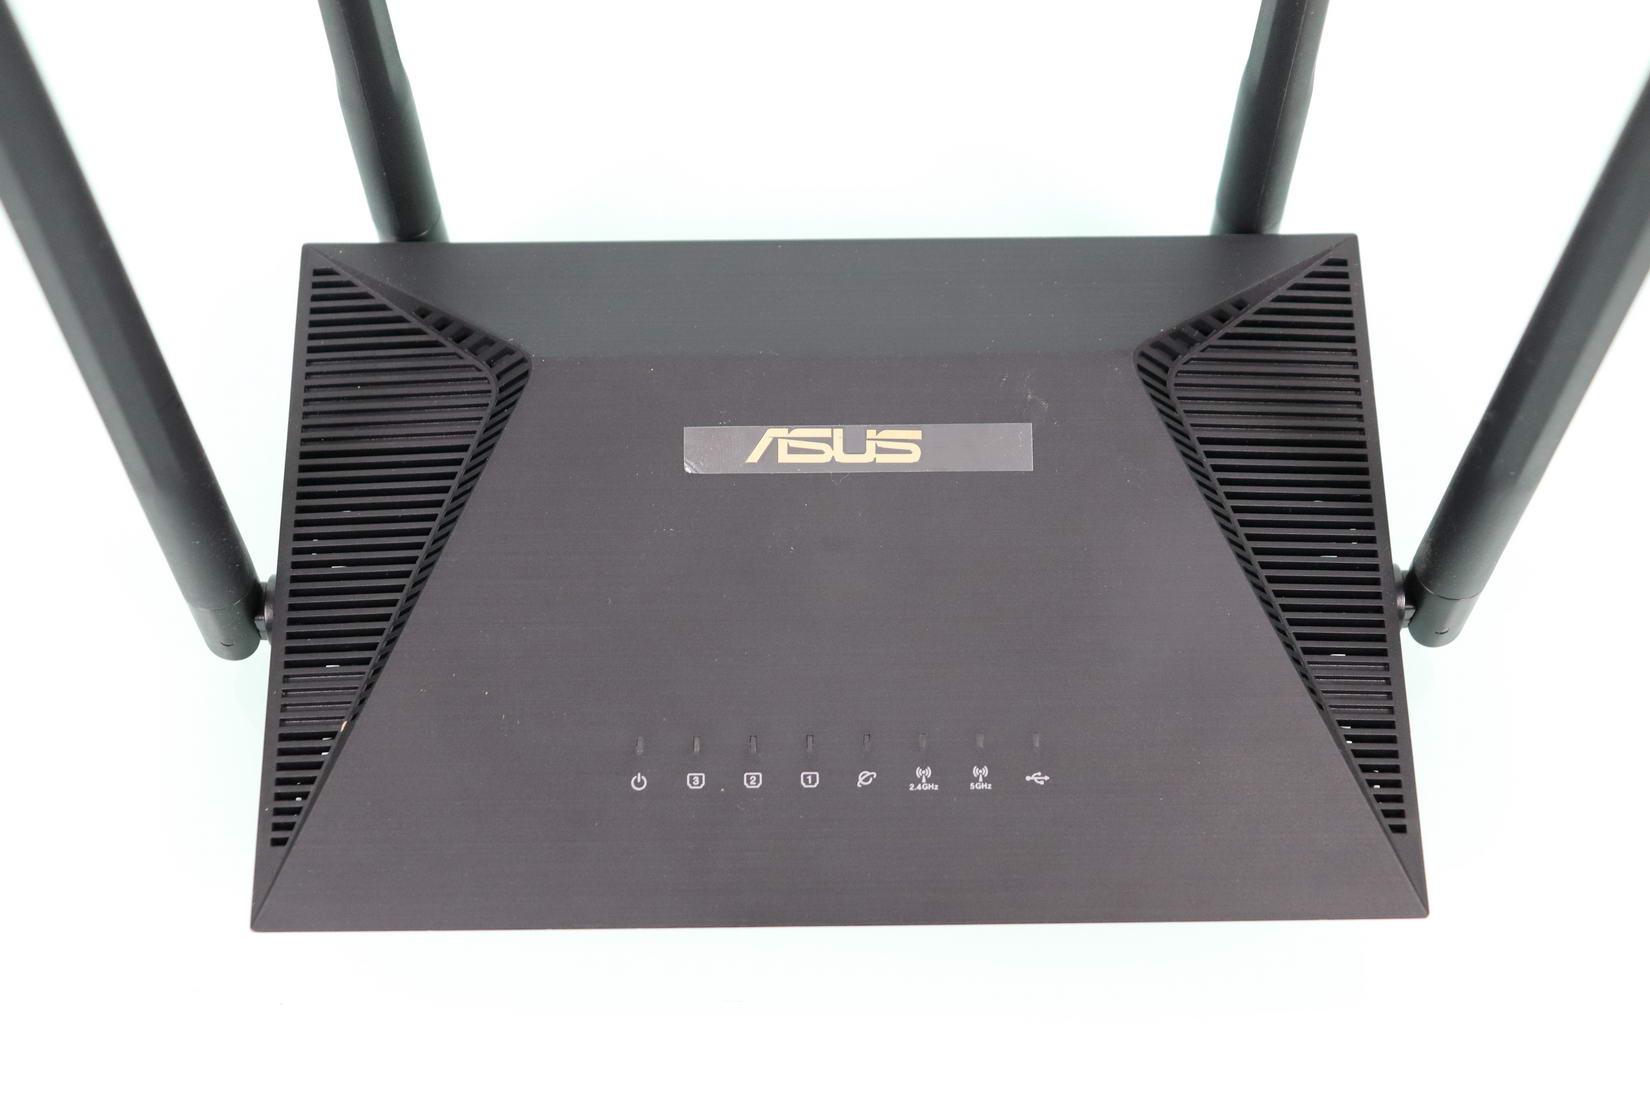 ASUS RT-AX53U WIFi router front